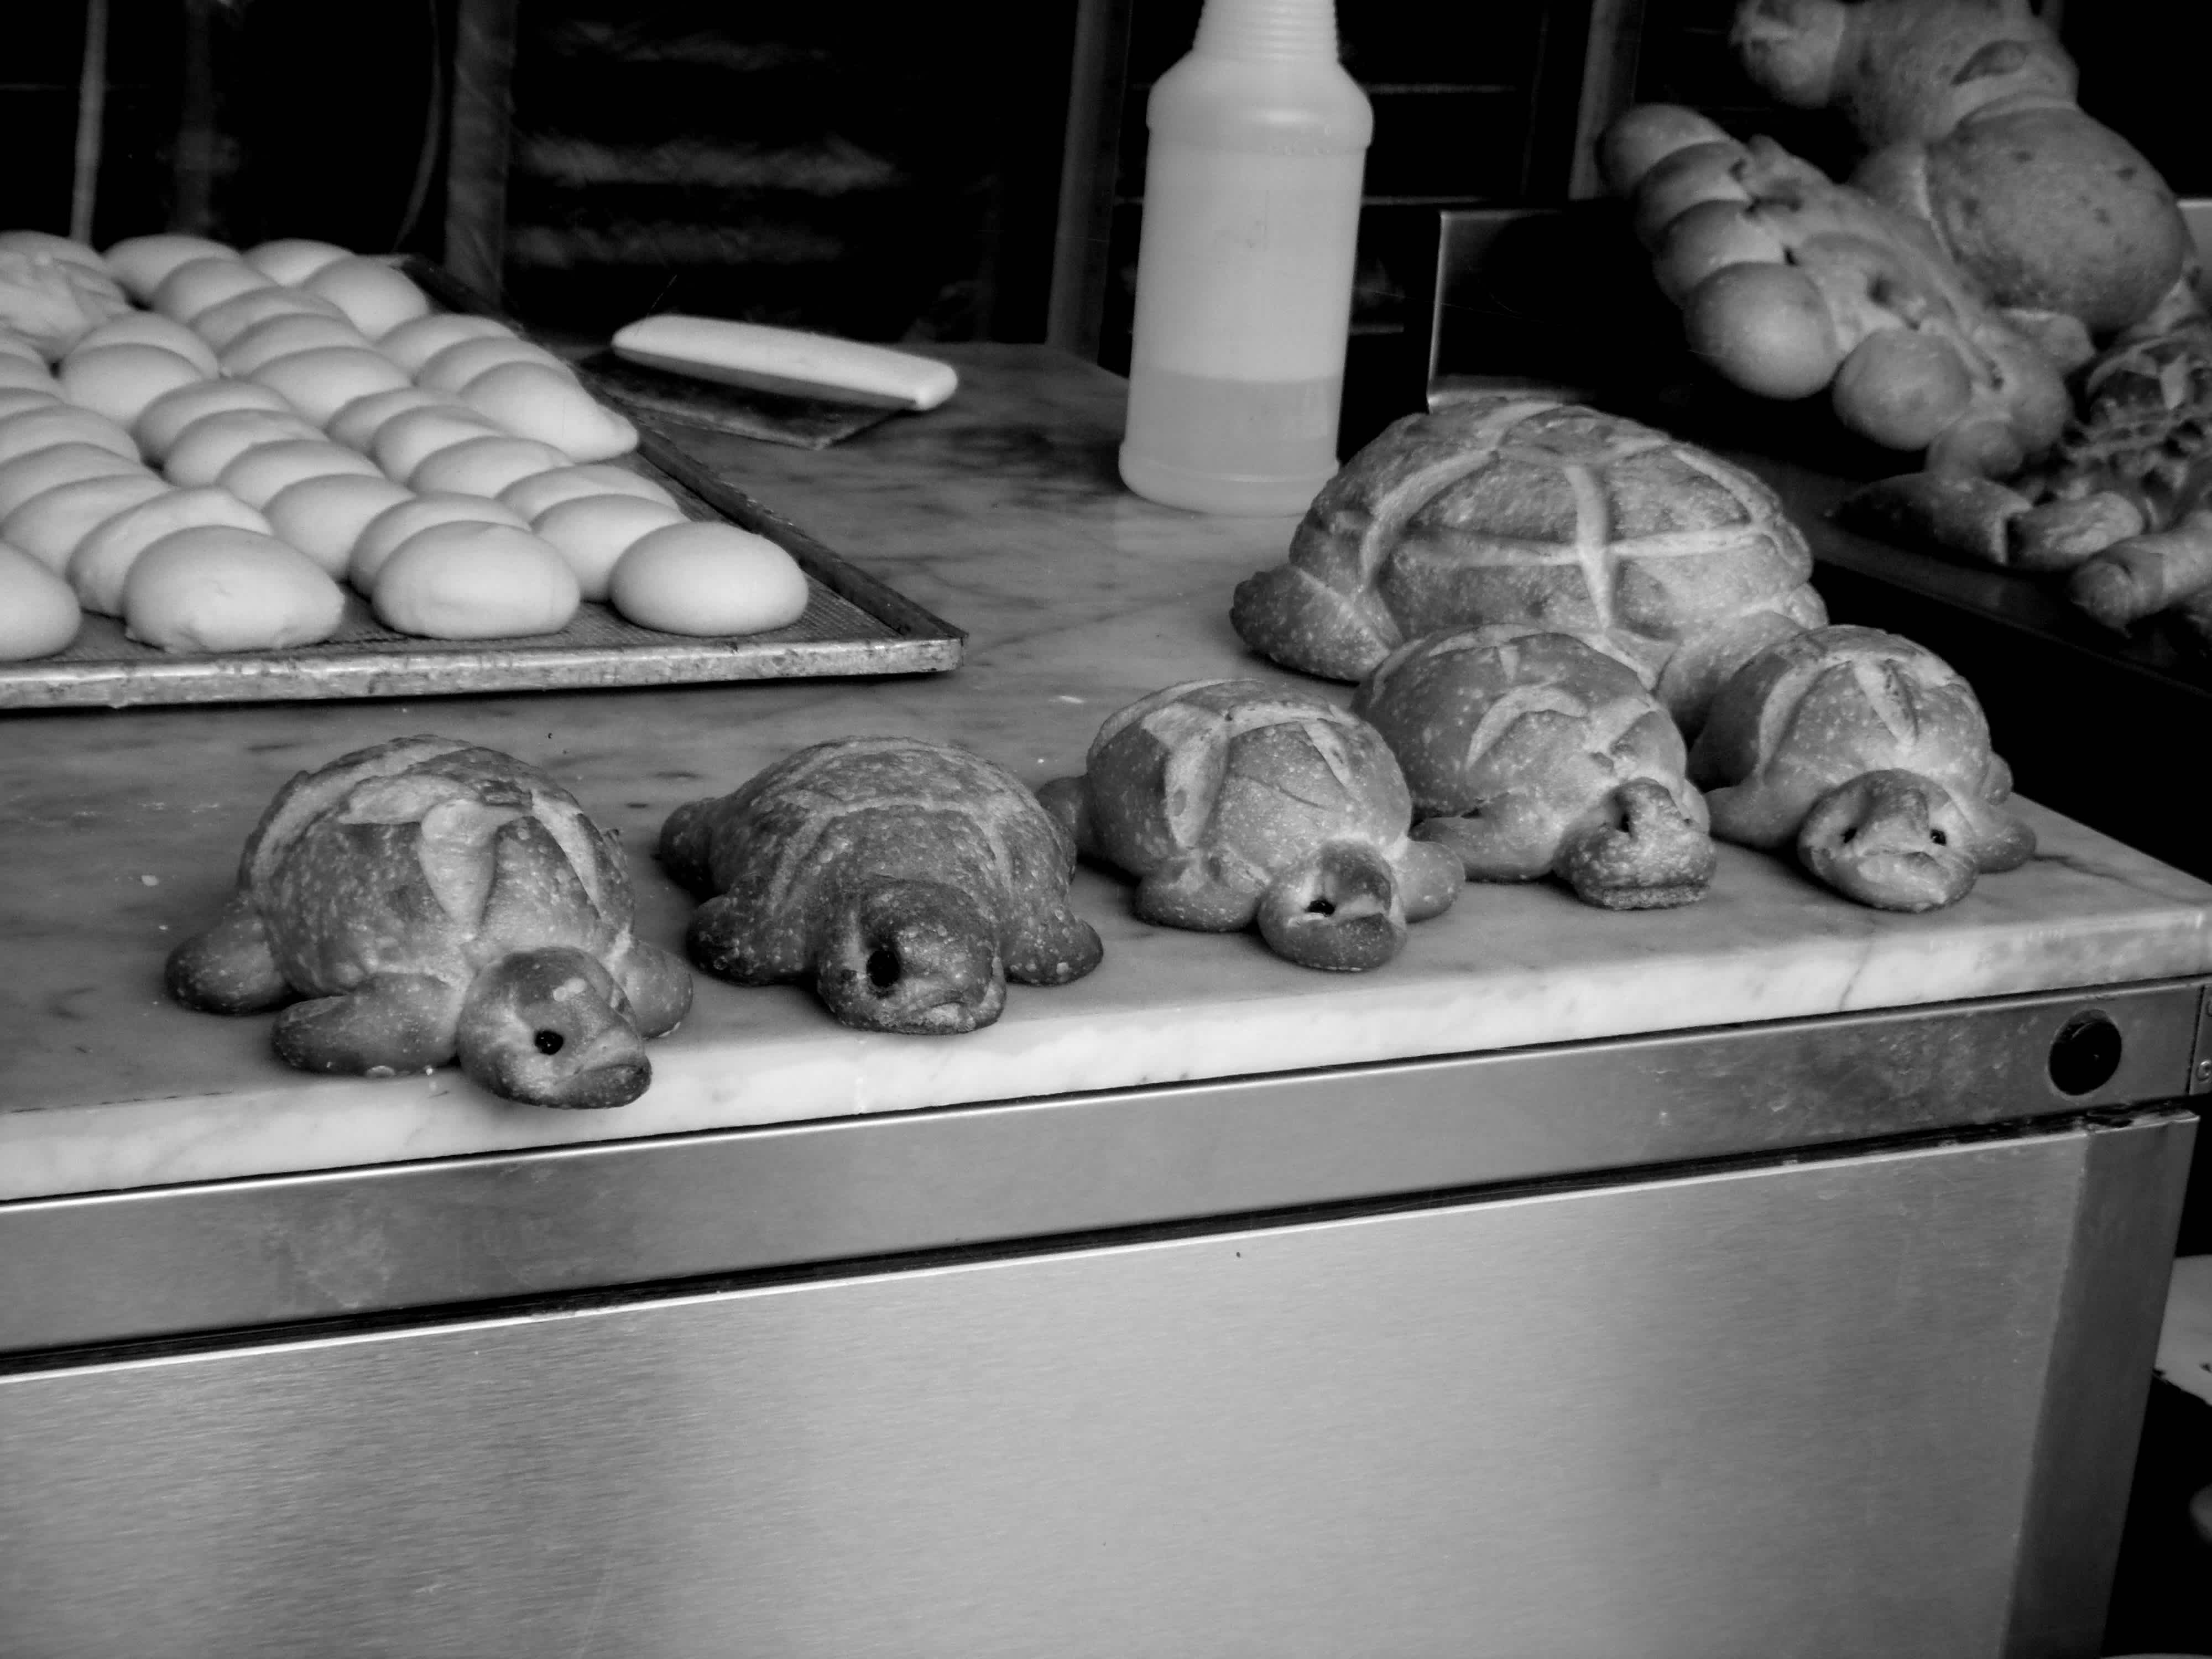 Bread shaped like turtles in black and white in Embarcadero, San Francisco, California.